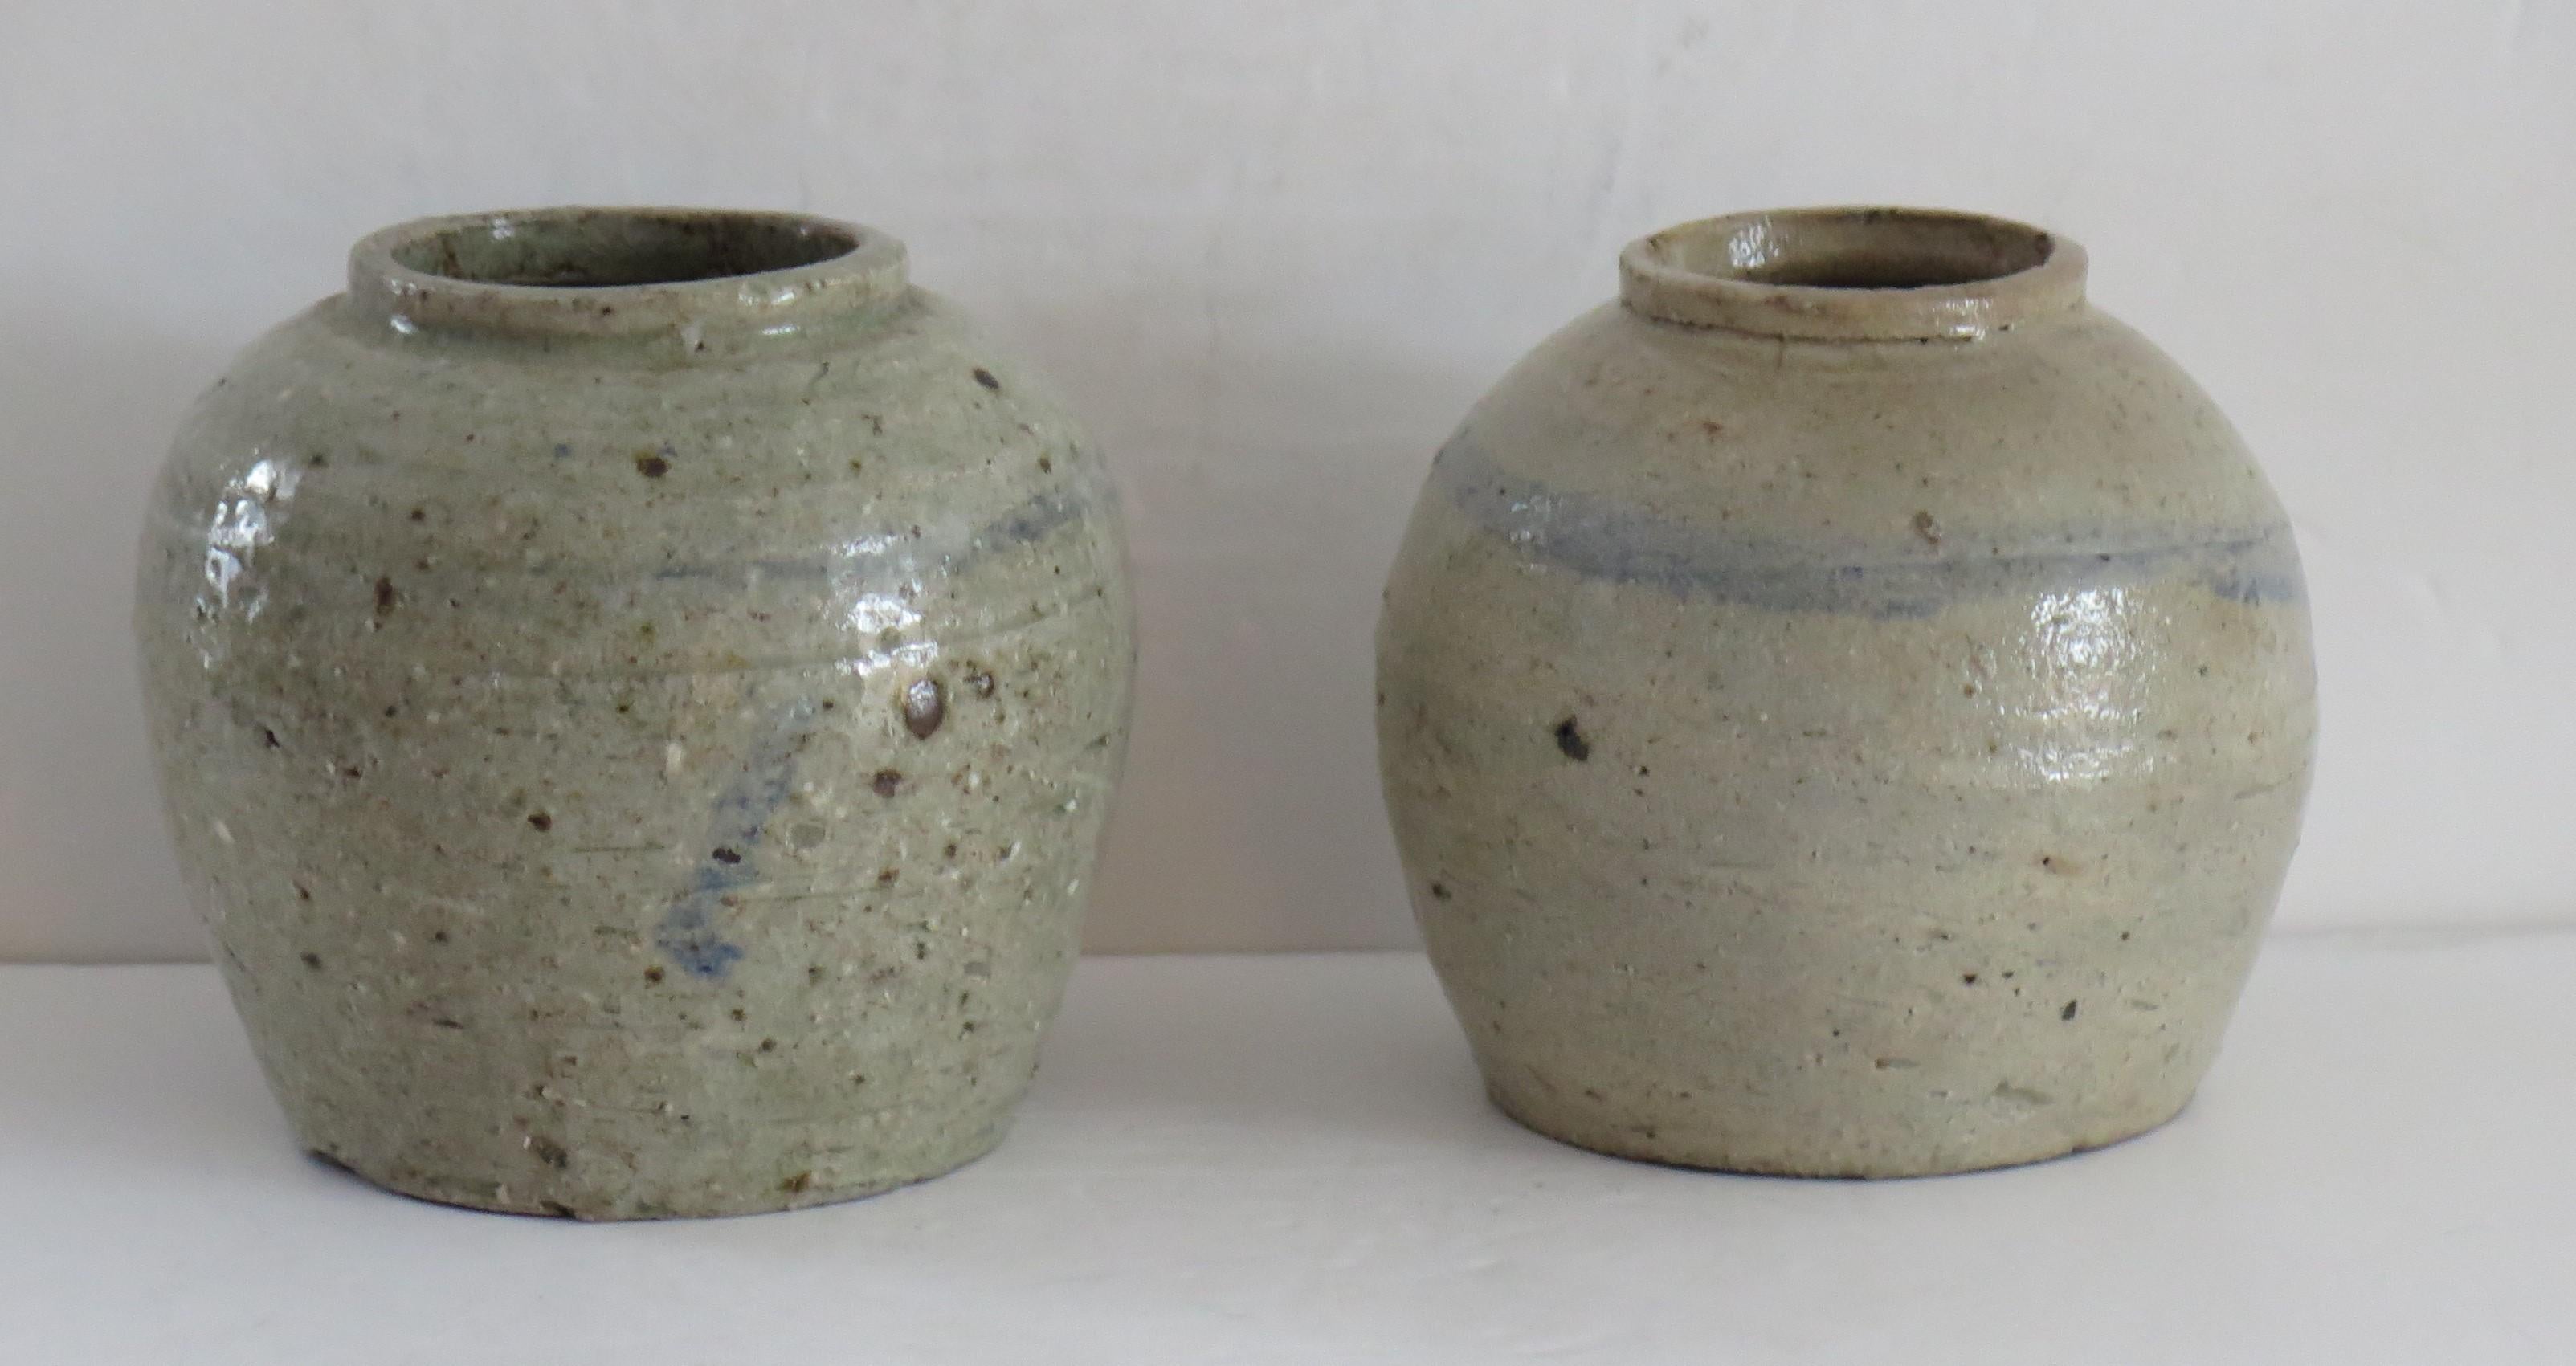 Hand-Crafted Two Chinese Ming Ceramic Provincial Jars  Celadon Glaze, Early 17th Century